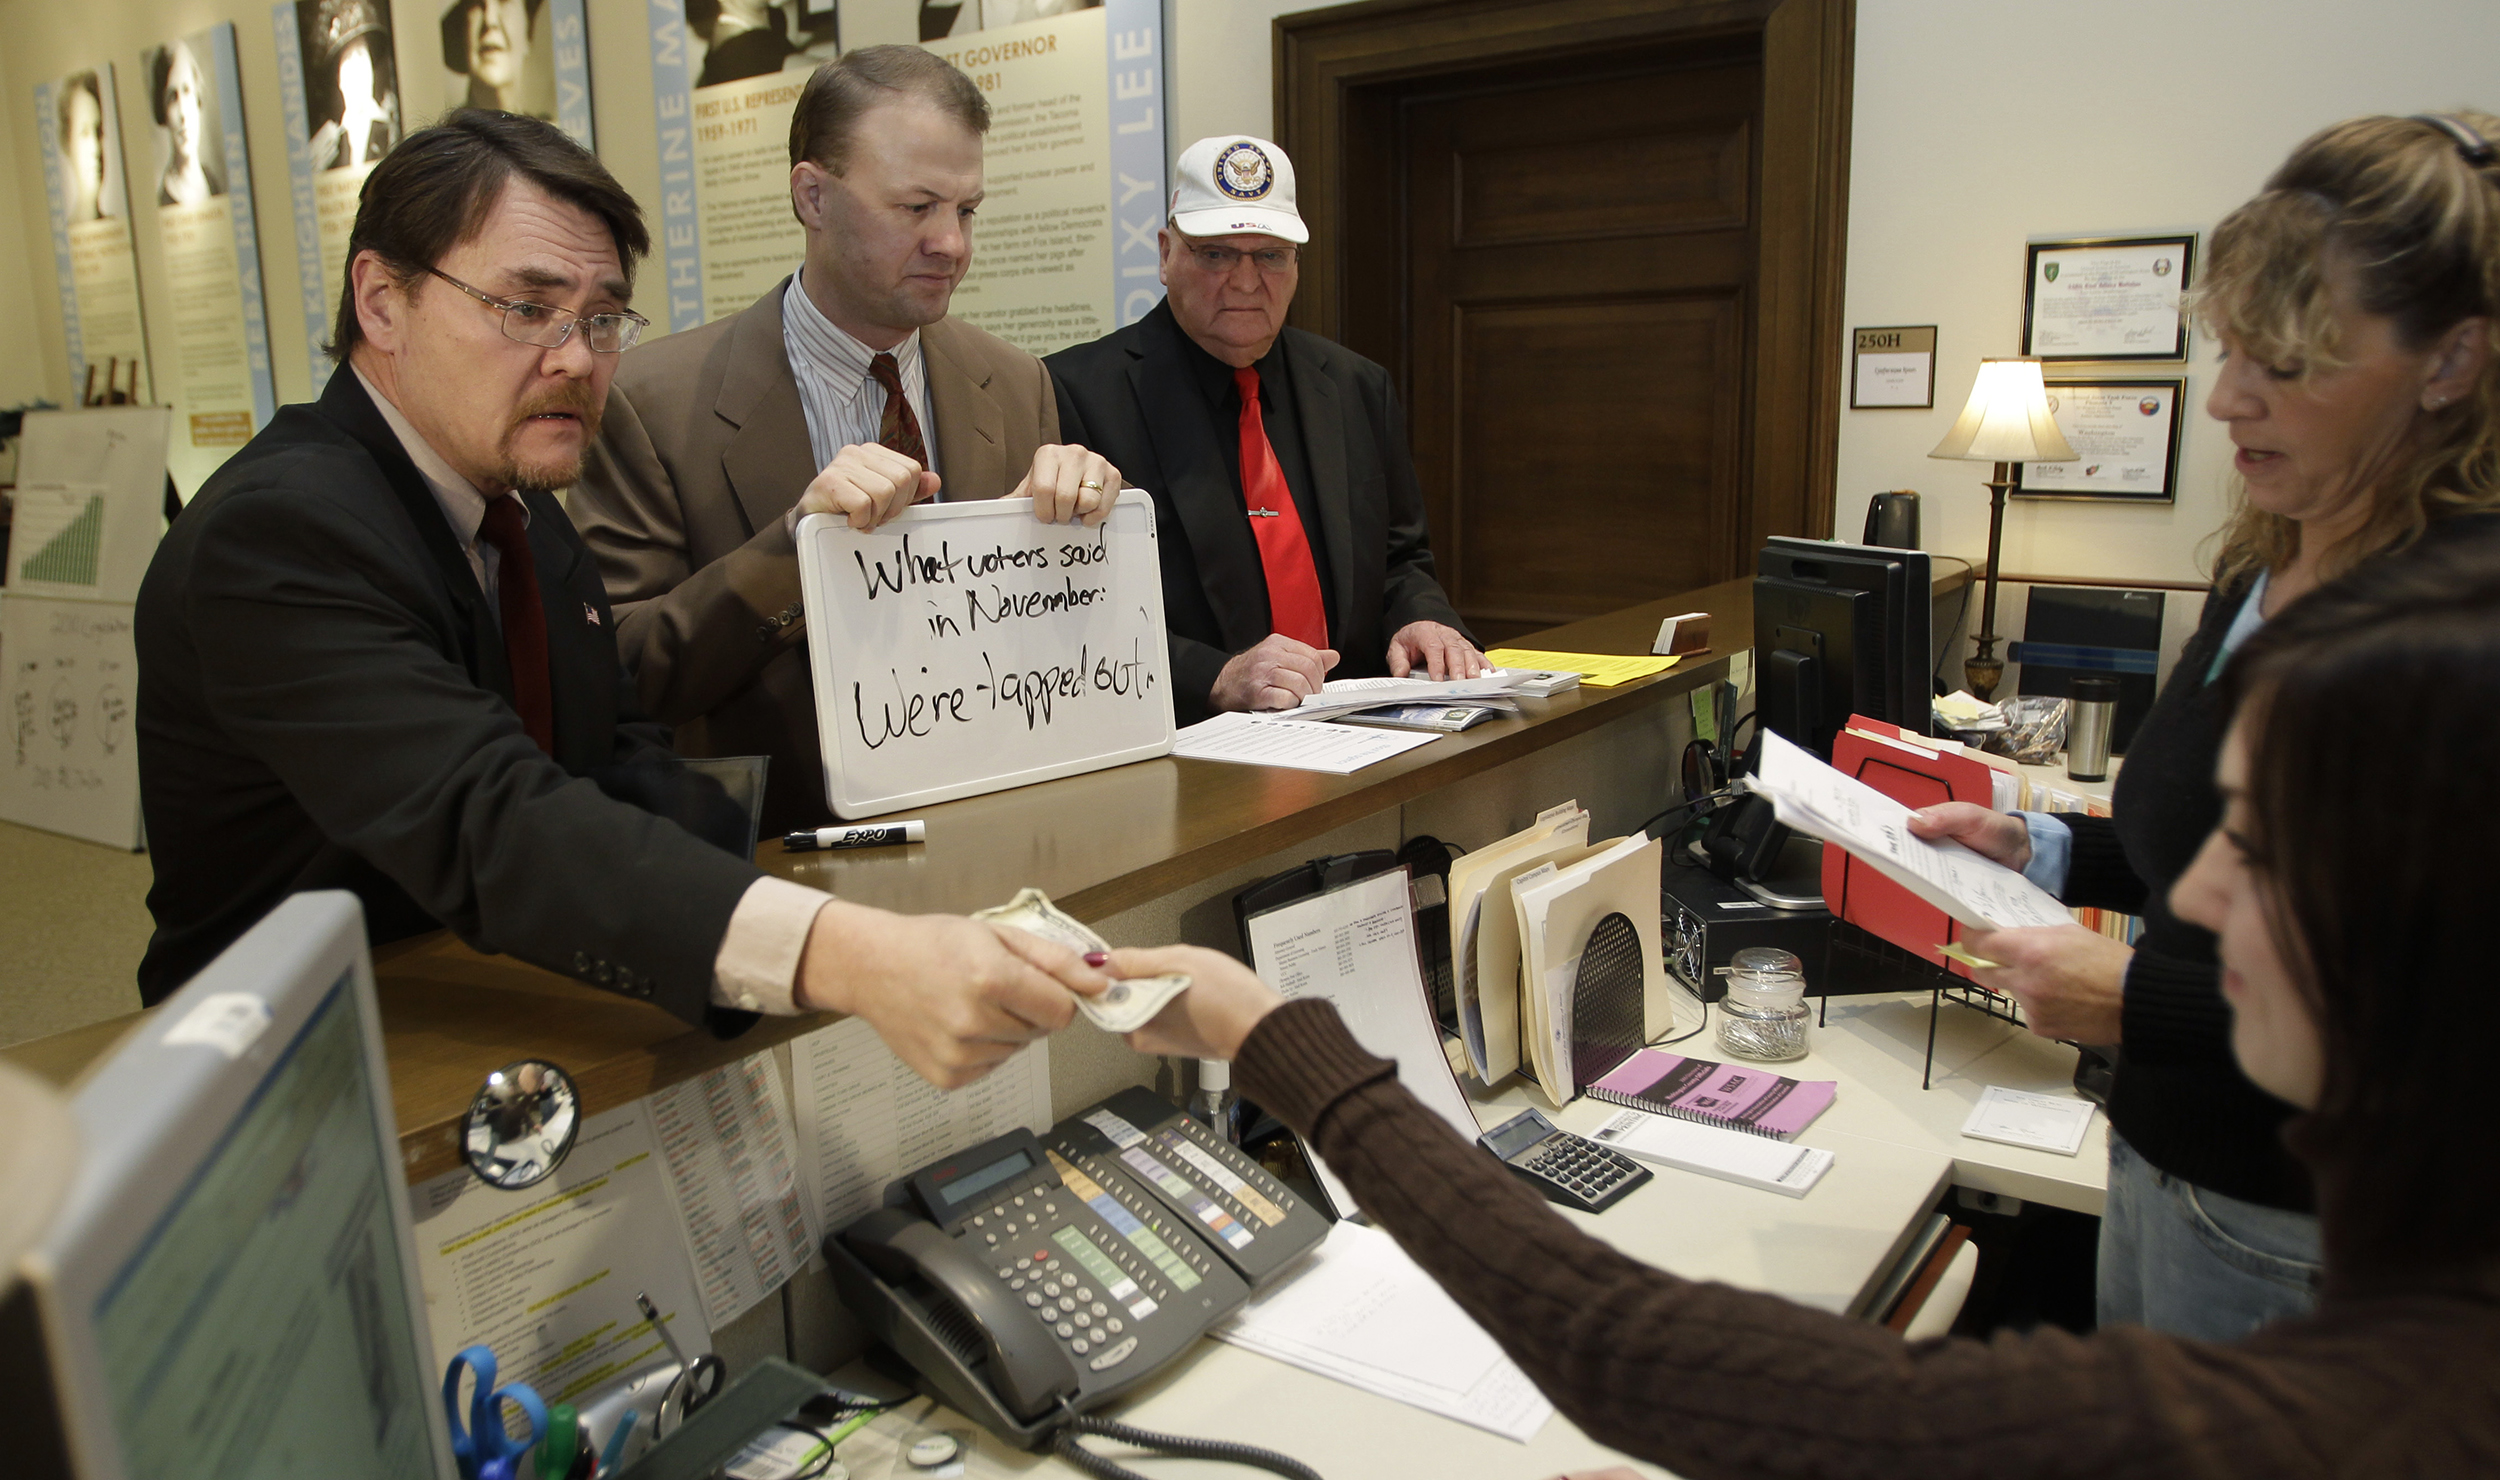 Tim Eyman stands at a reception desk next to a man paying a $5 filing fee